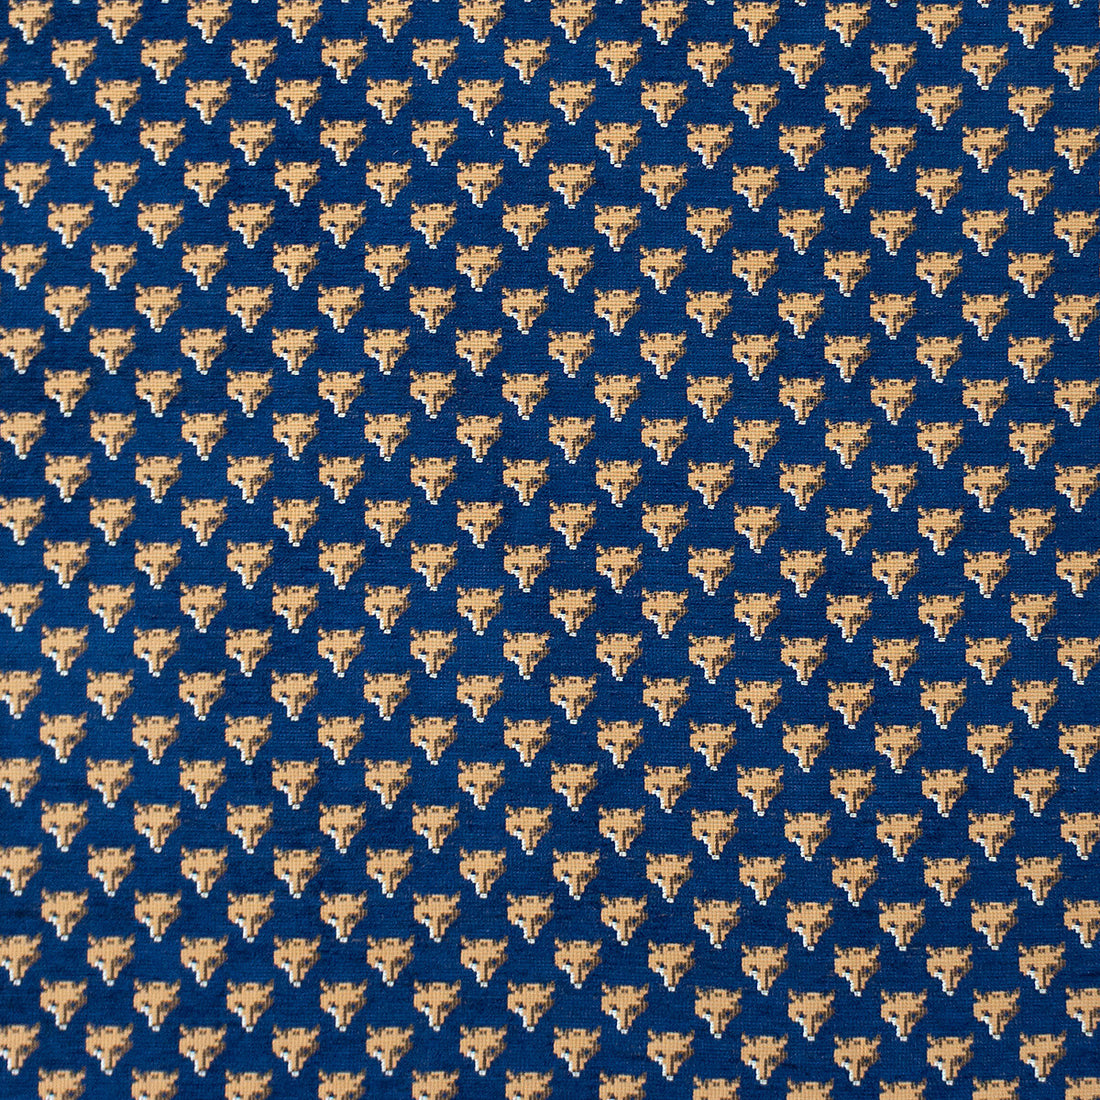 Raposu fabric in navy color - pattern LCT1077.004.0 - by Gaston y Daniela in the Lorenzo Castillo VII The Rectory collection